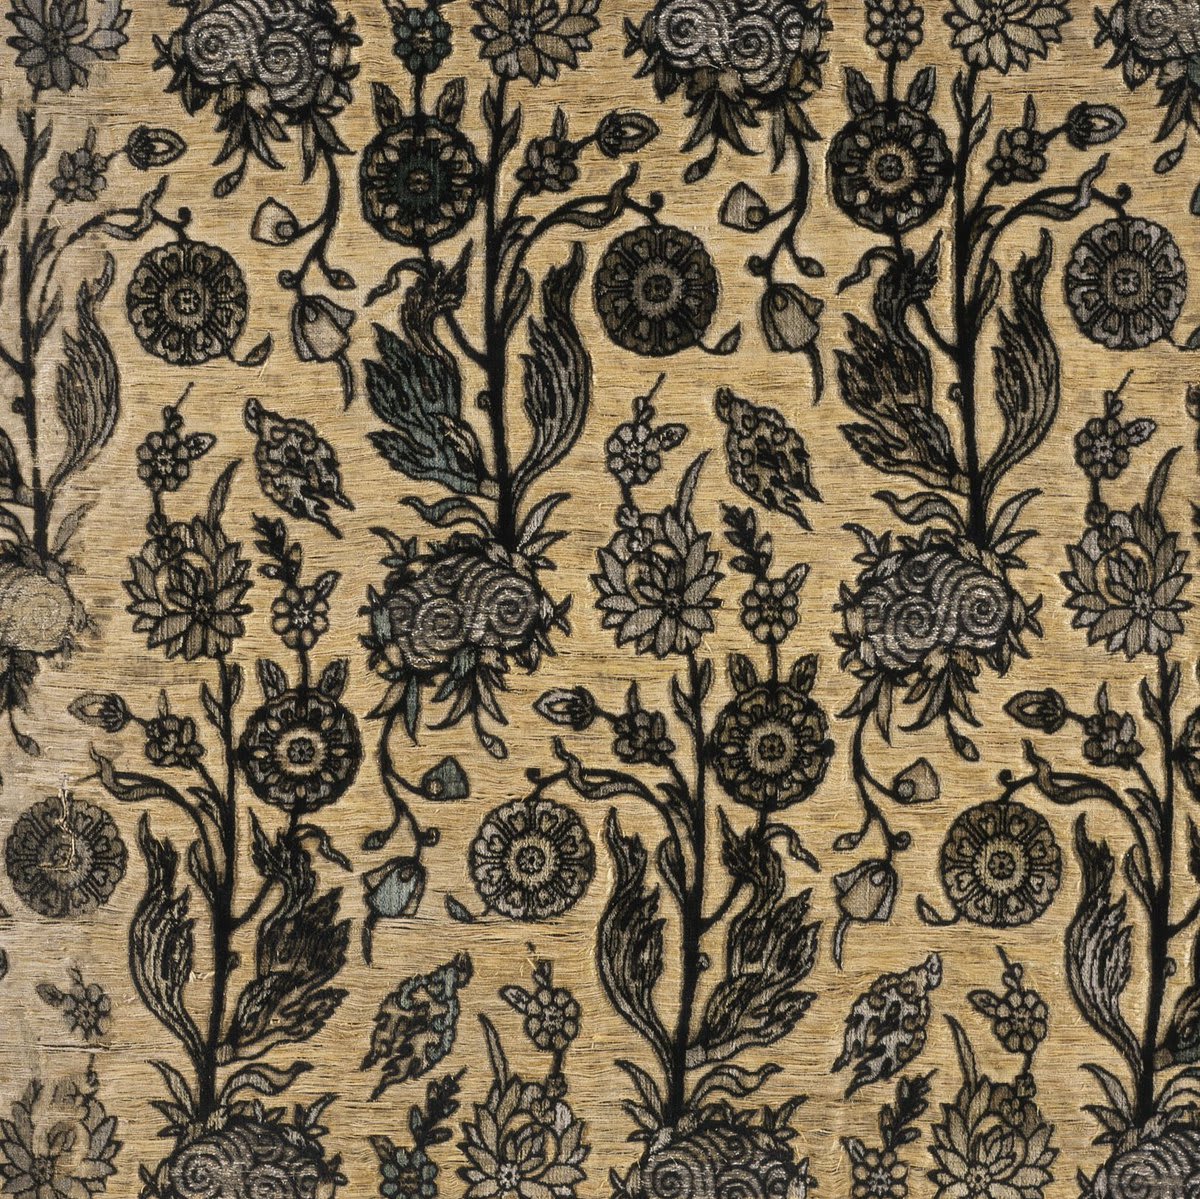 It's all in the details... Get a little lost in the intricate floral details of this 17th century silk and velvet textile from Iran. "Textile Length with Design of Flowering Plants," Iran, cut and voided silk velvet on a metallic ground, 17th century.